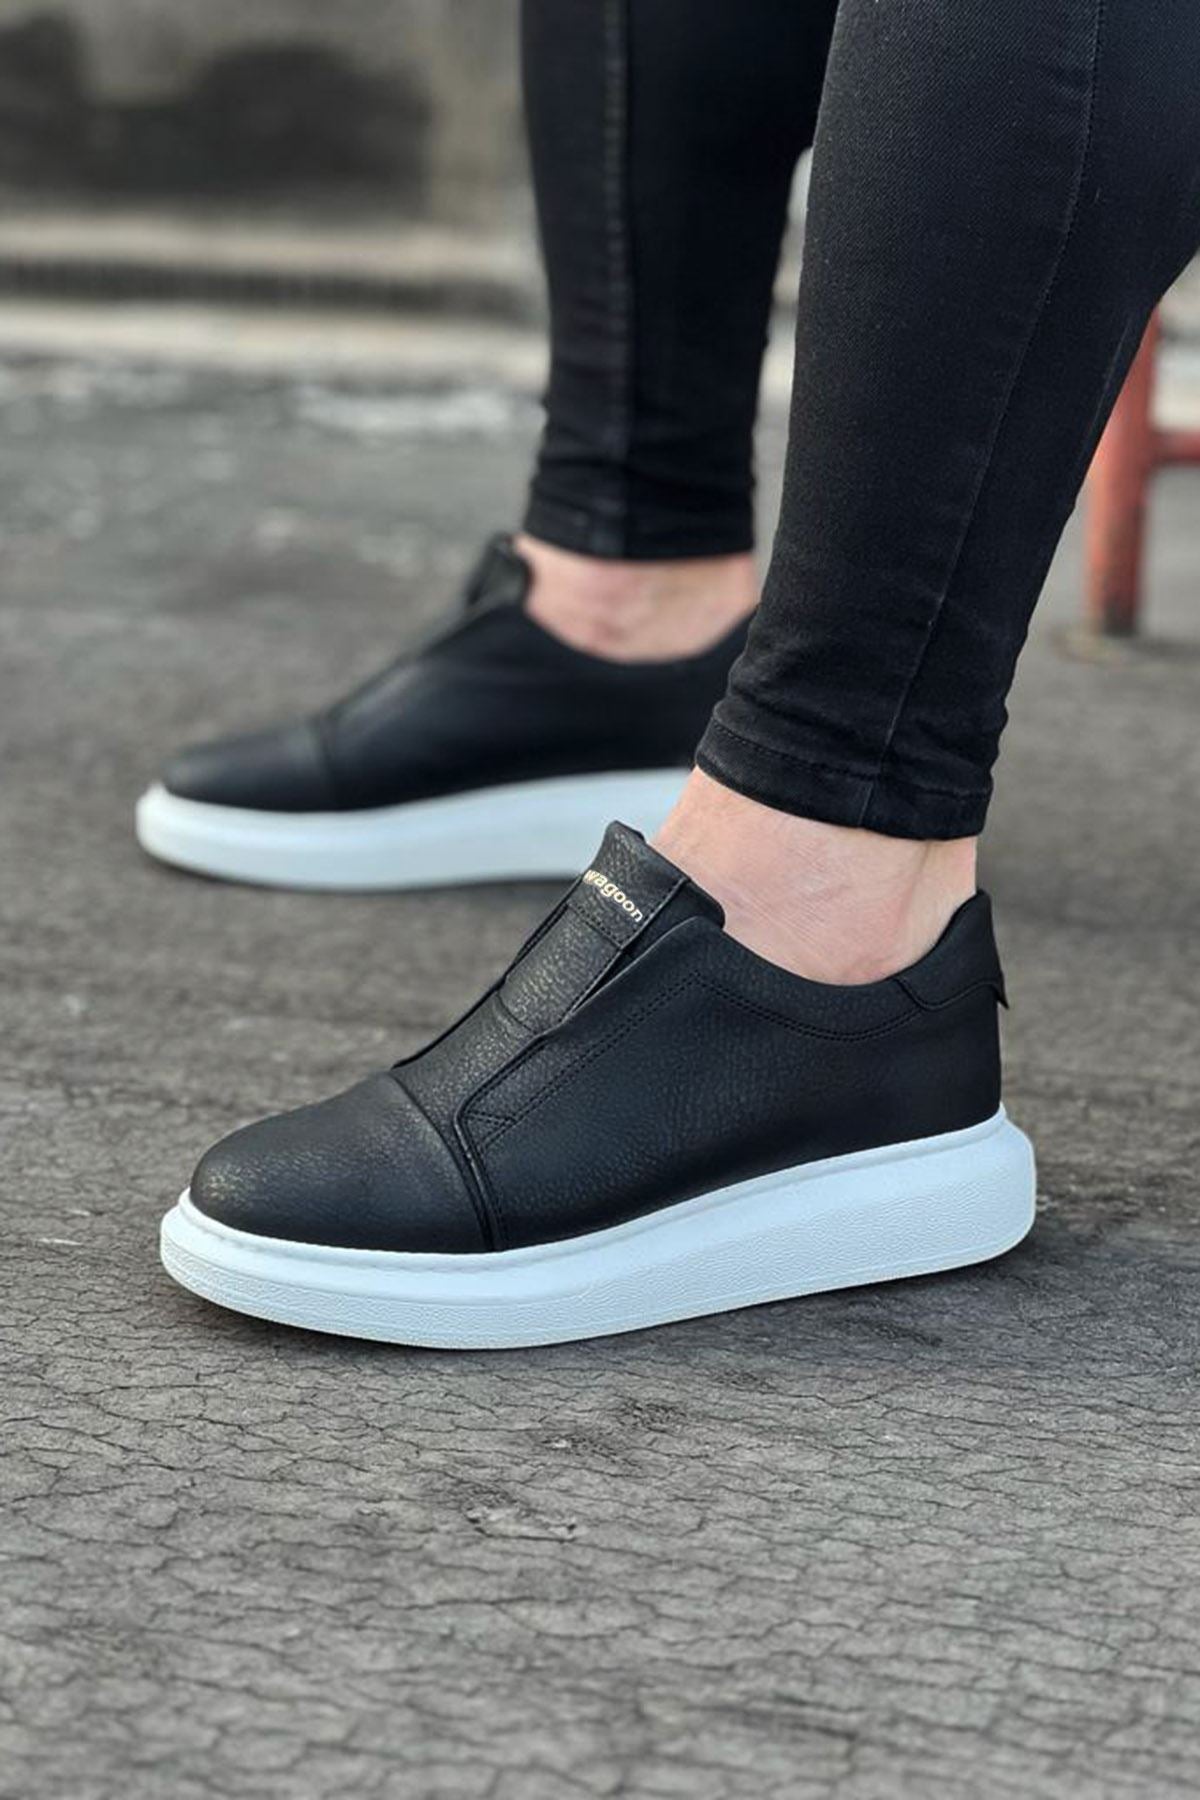 WG023 Black Daily Casual Men's Shoes - STREETMODE ™